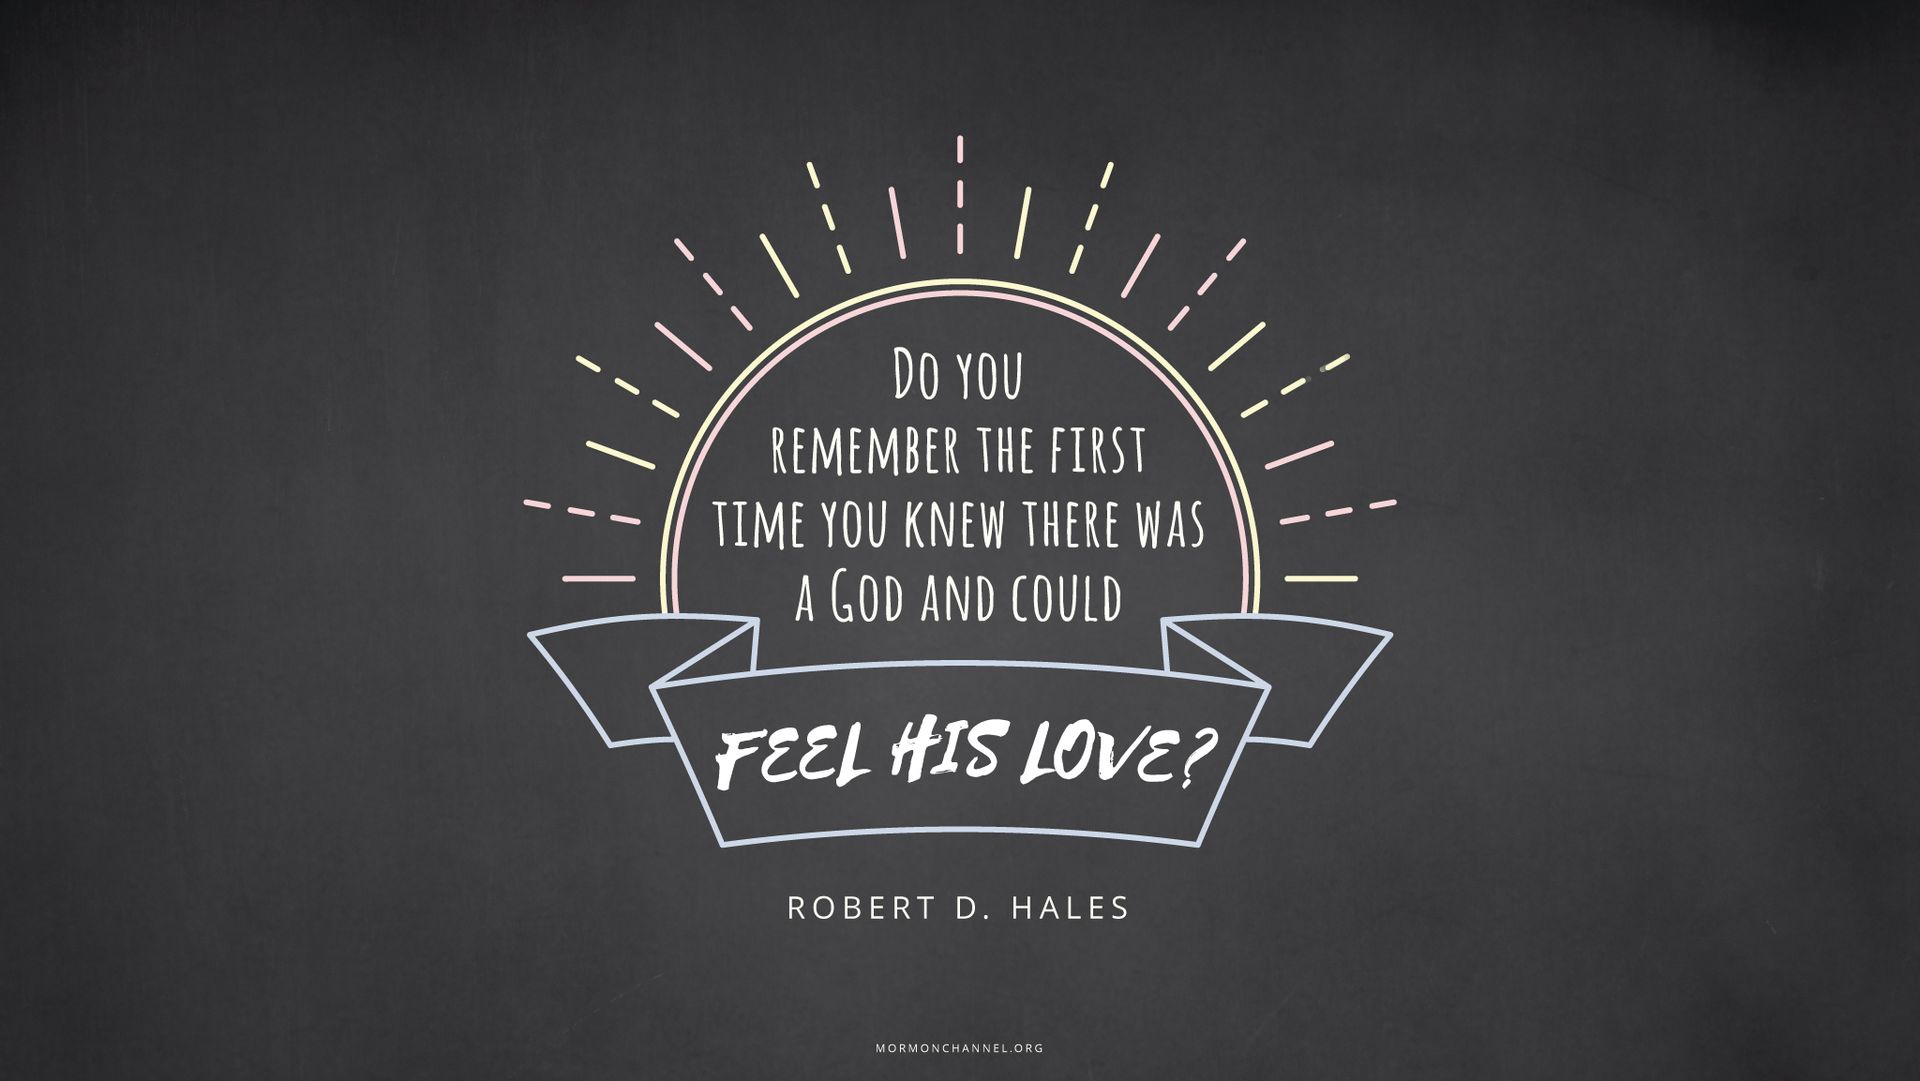 “Do you remember the first time you knew there was a God and could feel His love?”—Elder Robert D. Hales, “Eternal Life—to Know Our Heavenly Father and His Son, Jesus Christ”